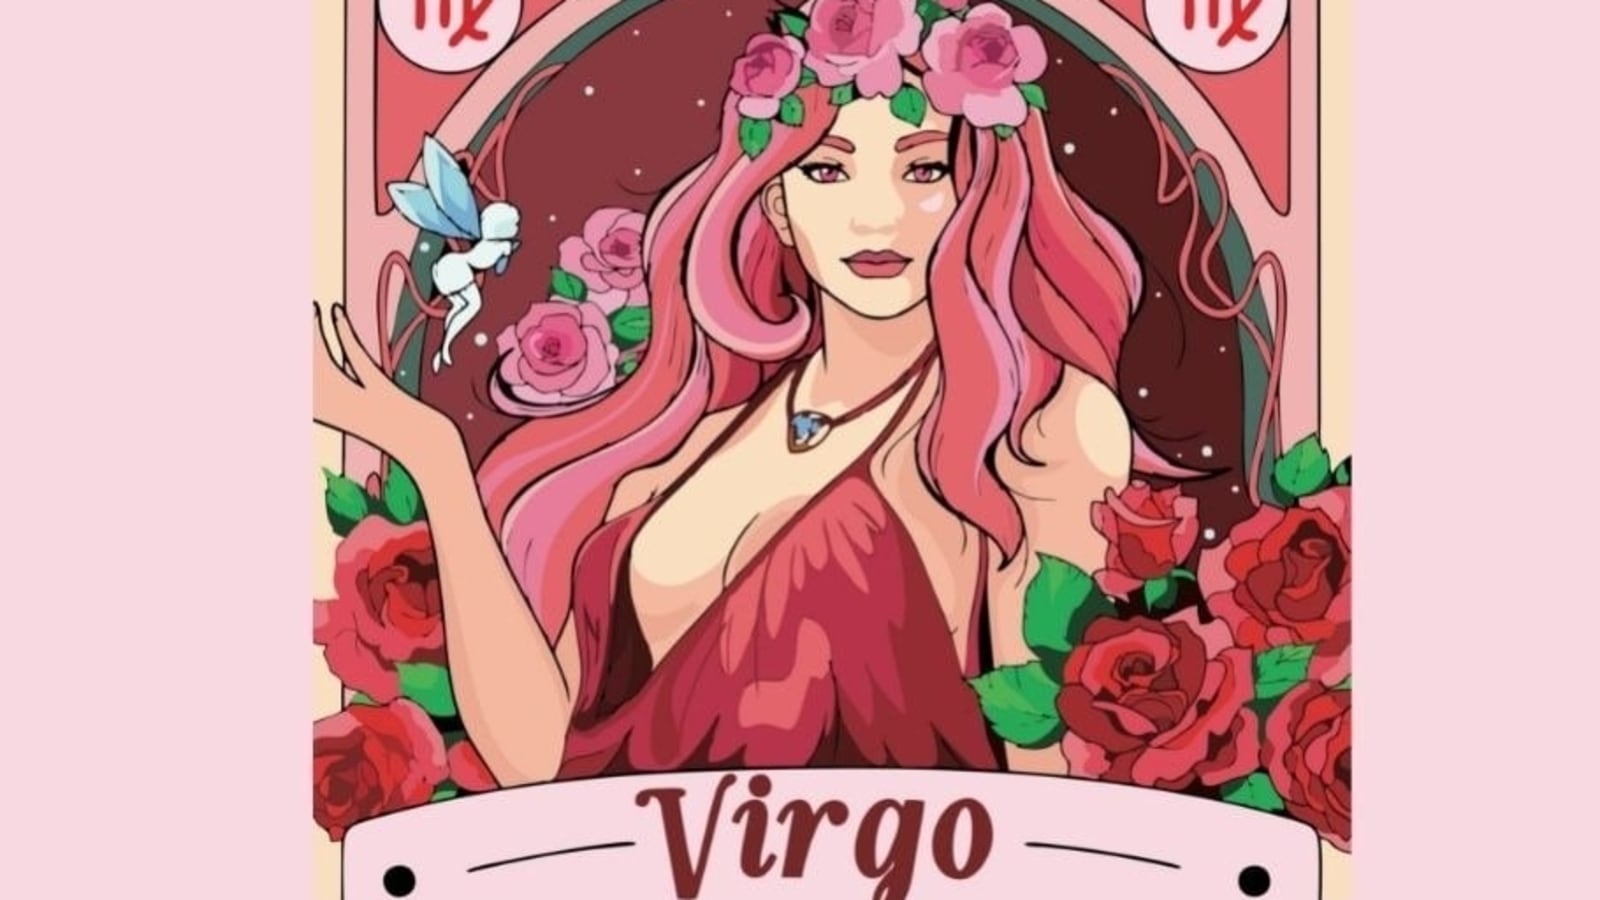 Virgo Daily Horoscope for August 3 2022: You’ll be occupied with work